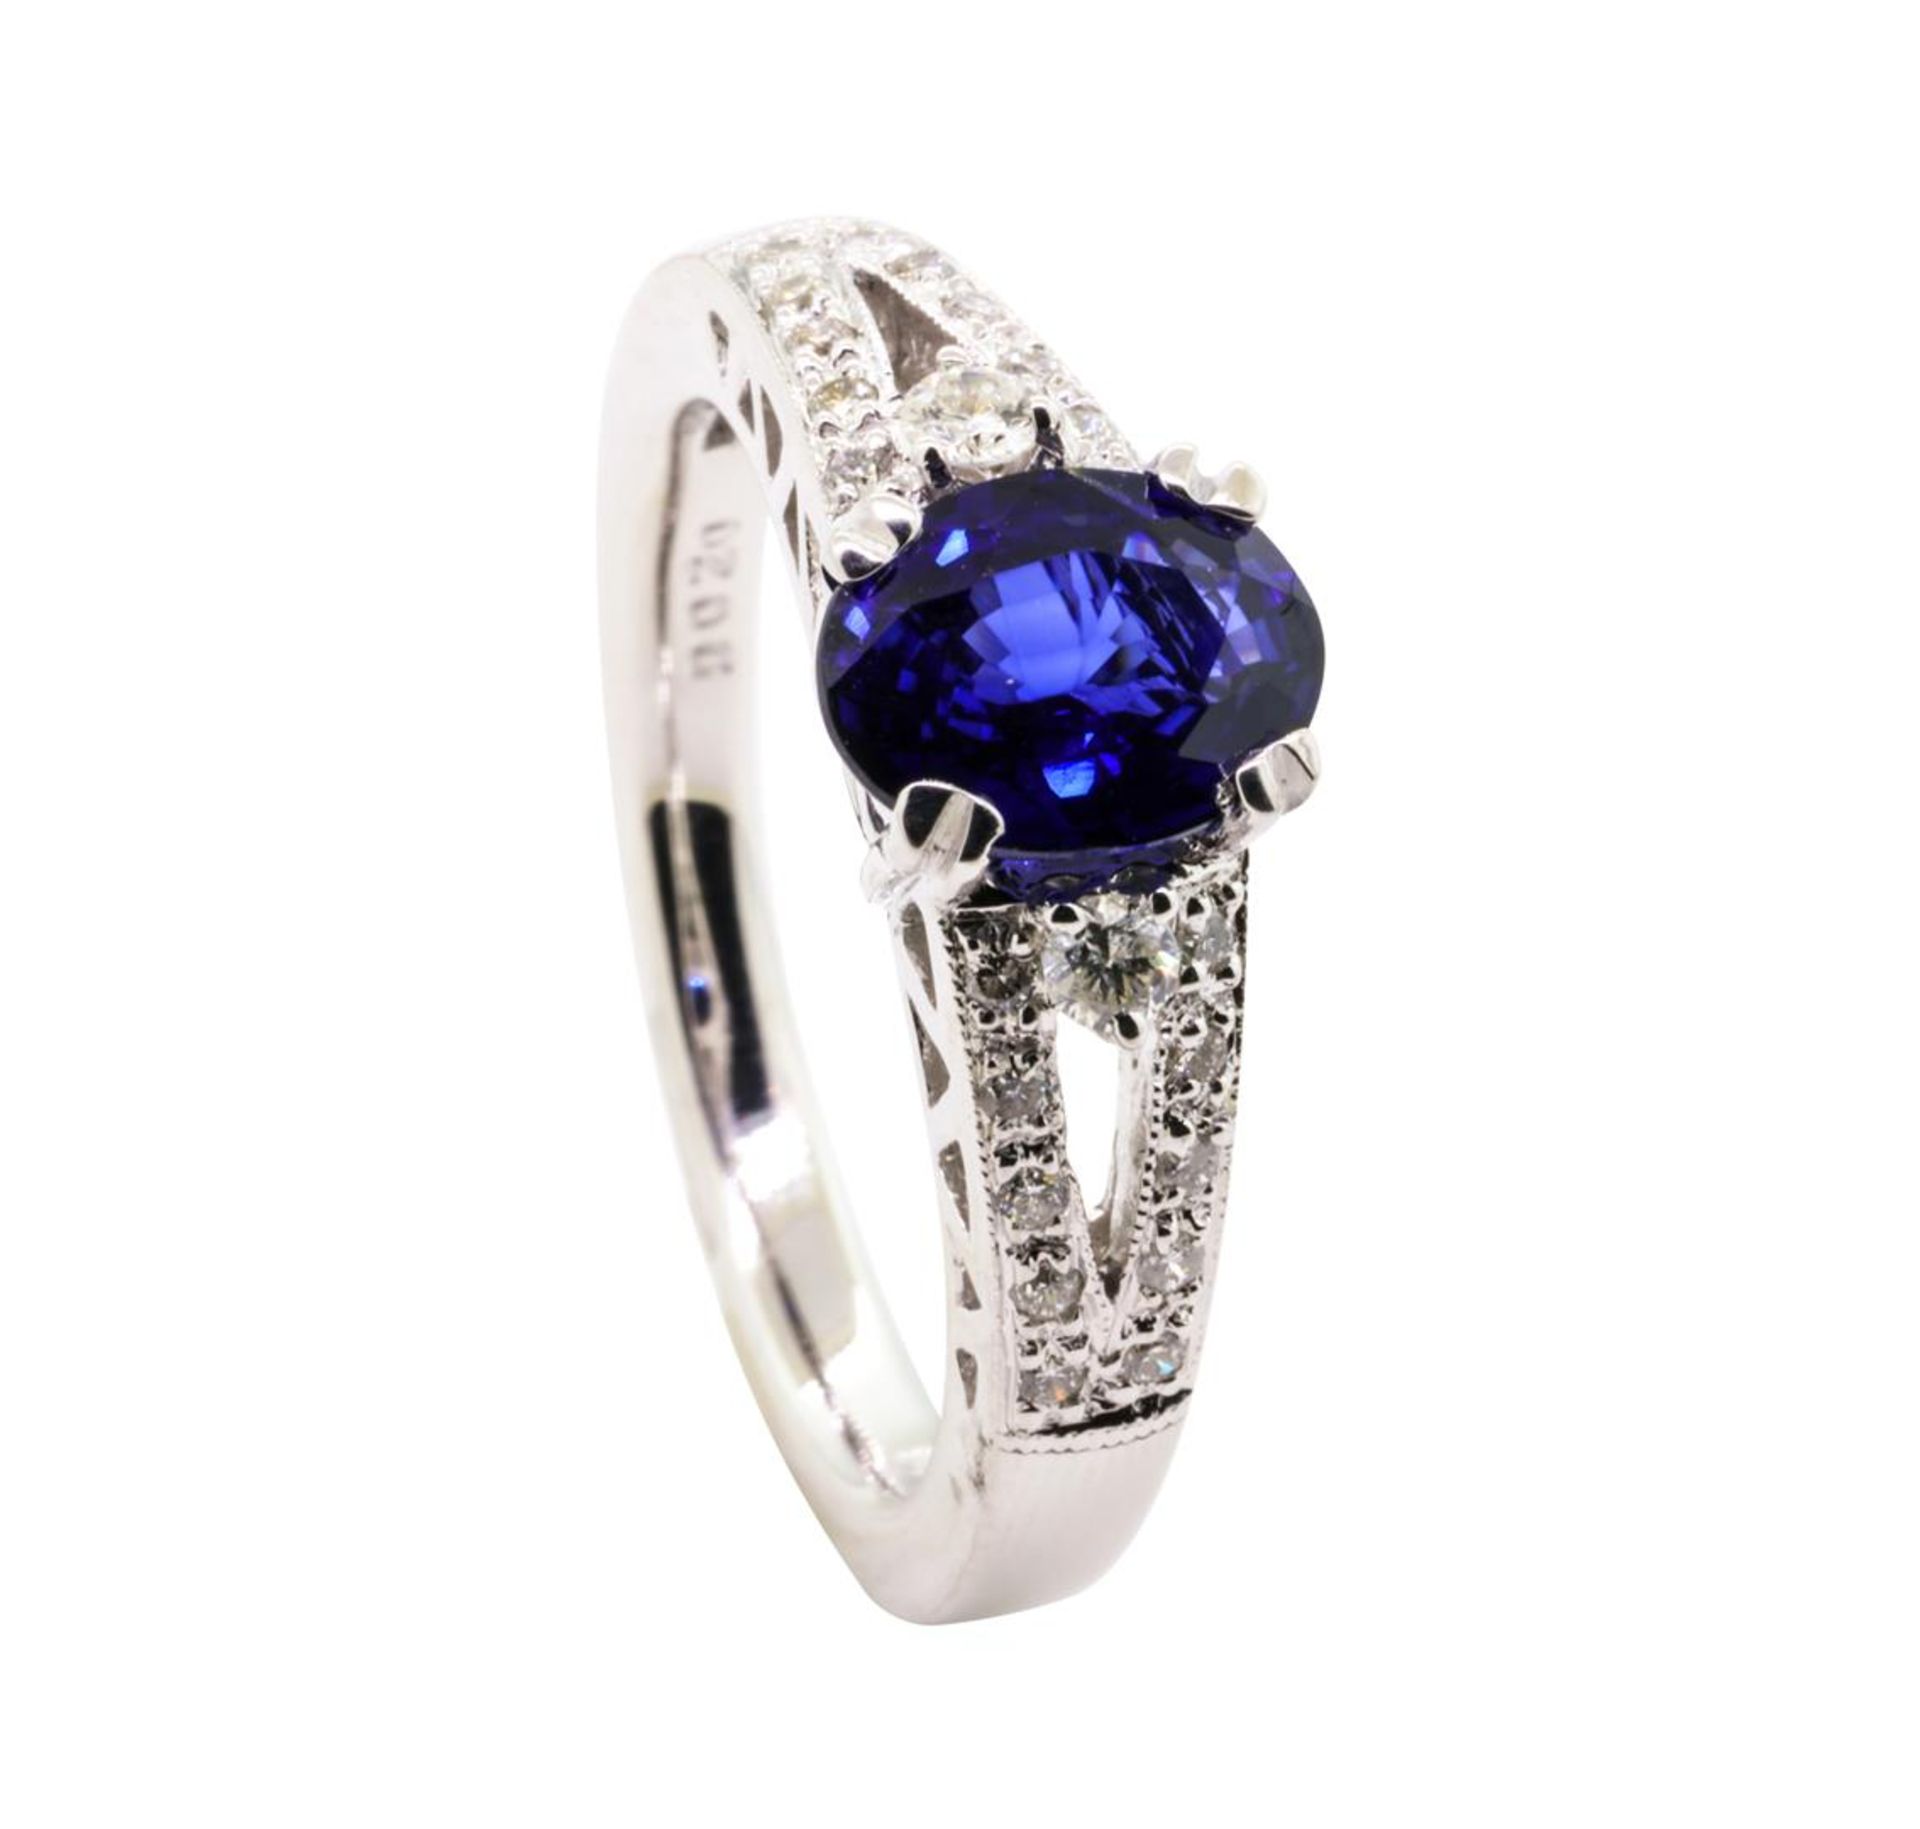 1.53 ctw Sapphire and Diamond Ring - 14KT White Gold - Image 4 of 5